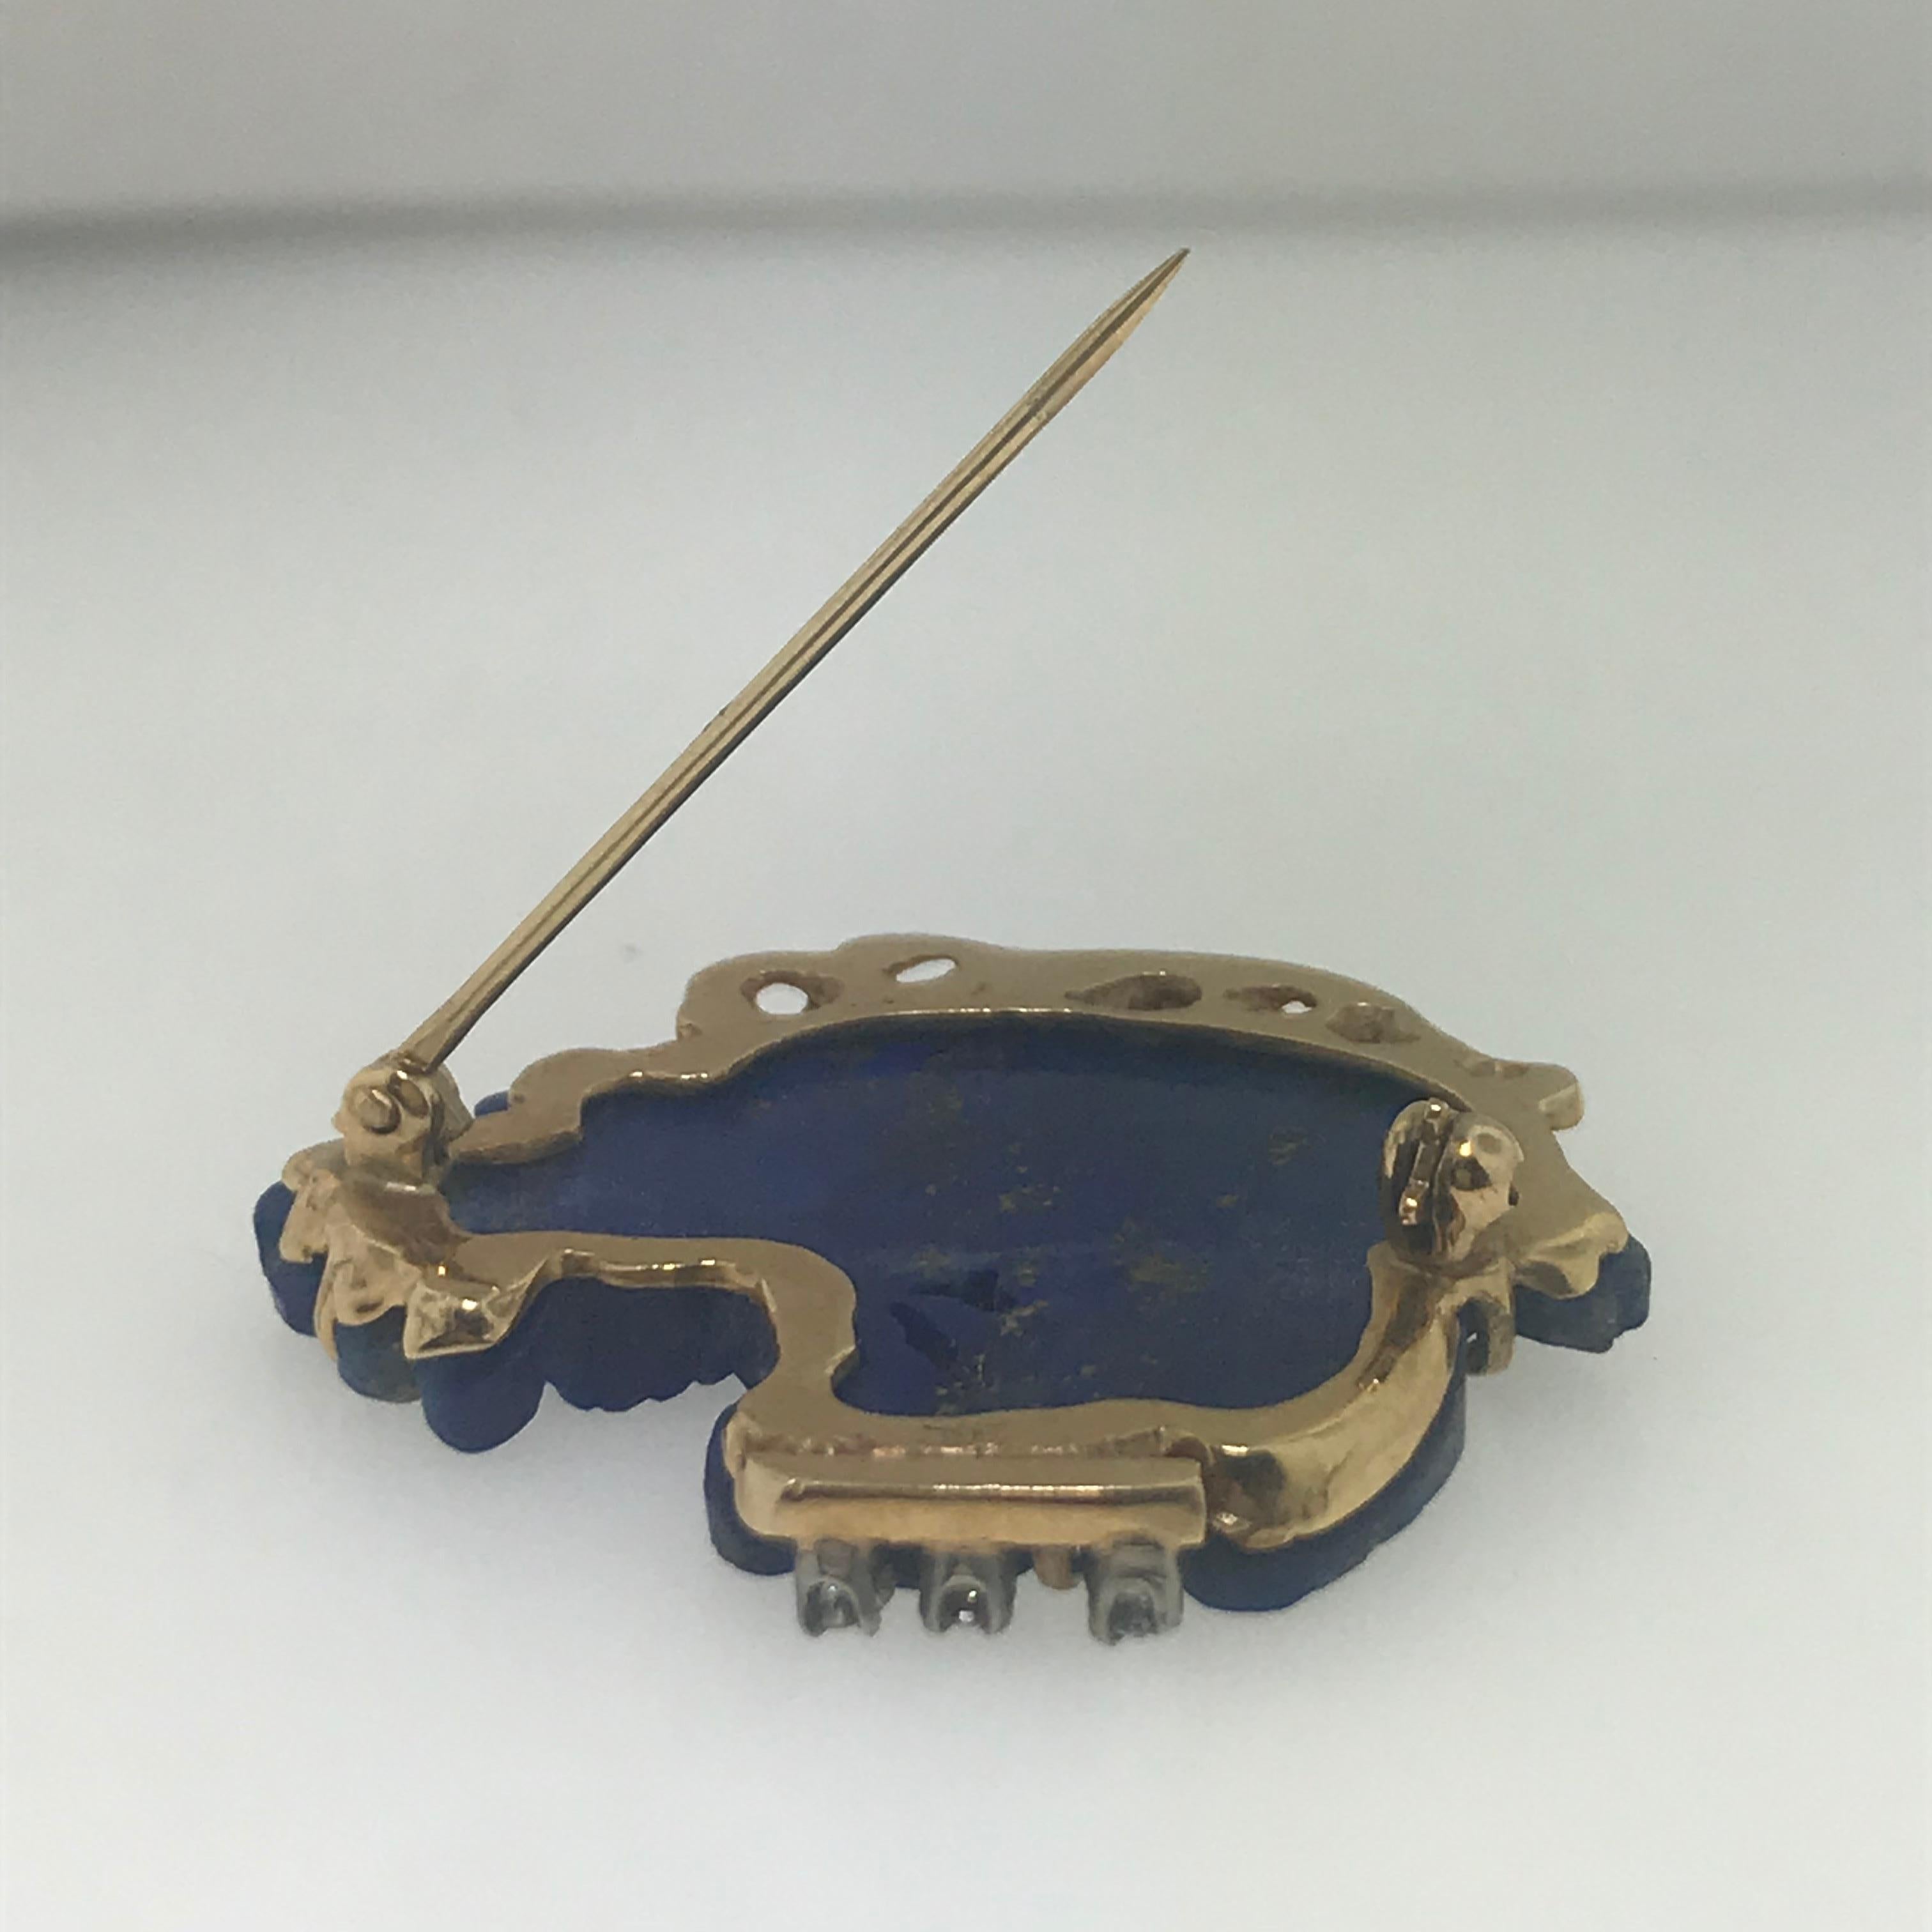 This Blue Lapis and Diamond Horse Head Pin is very unique and amazing quality!  It is 14 karat yellow gold and could be converted to a pendant if this would be your preference.

If you are a fine jewelry, vintage piece collector this is a great